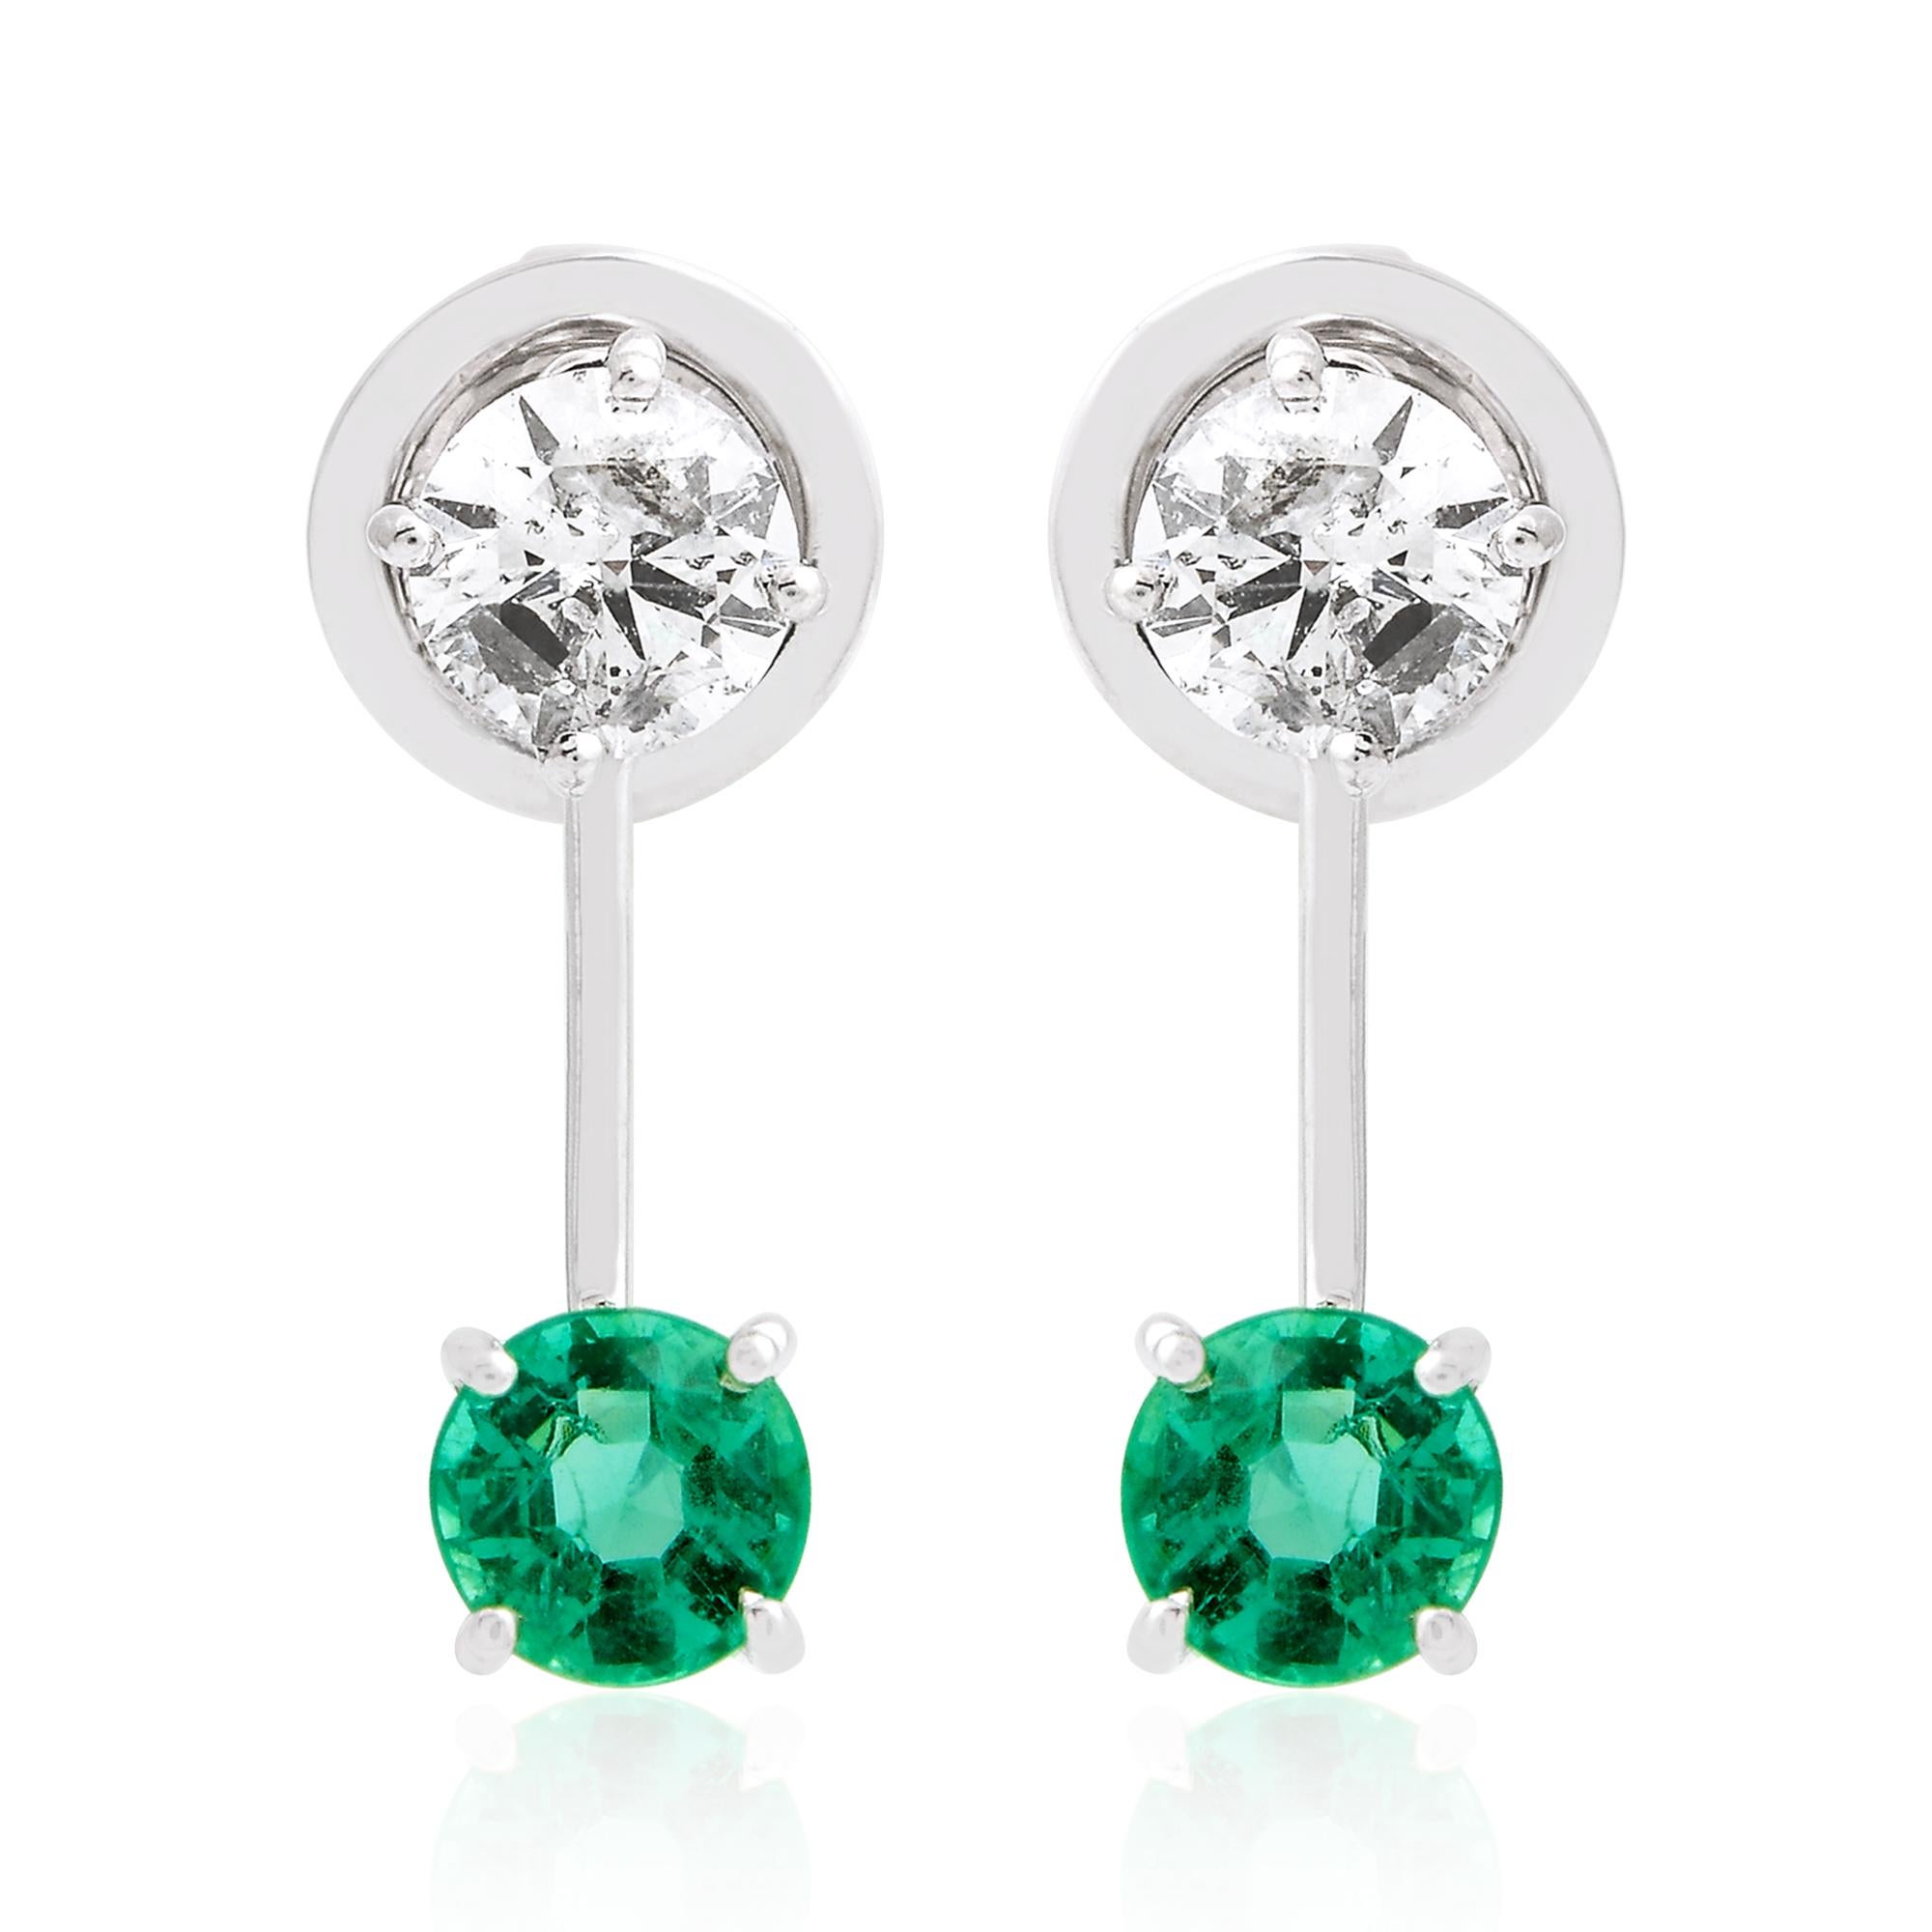 Item Code :- SEE-1536B (14k)
Gross Wt :- 2.20 gm
Solid 14k White Gold Wt :- 1.96 gm
Natural Diamond Wt :- 0.5 Carat ( AVERAGE DIAMOND CLARITY SI1-SI2 & COLOR H-I )
Natural Emerald Wt :- 0.7 Carat
Earrings Size :- 16x5 mm

✦